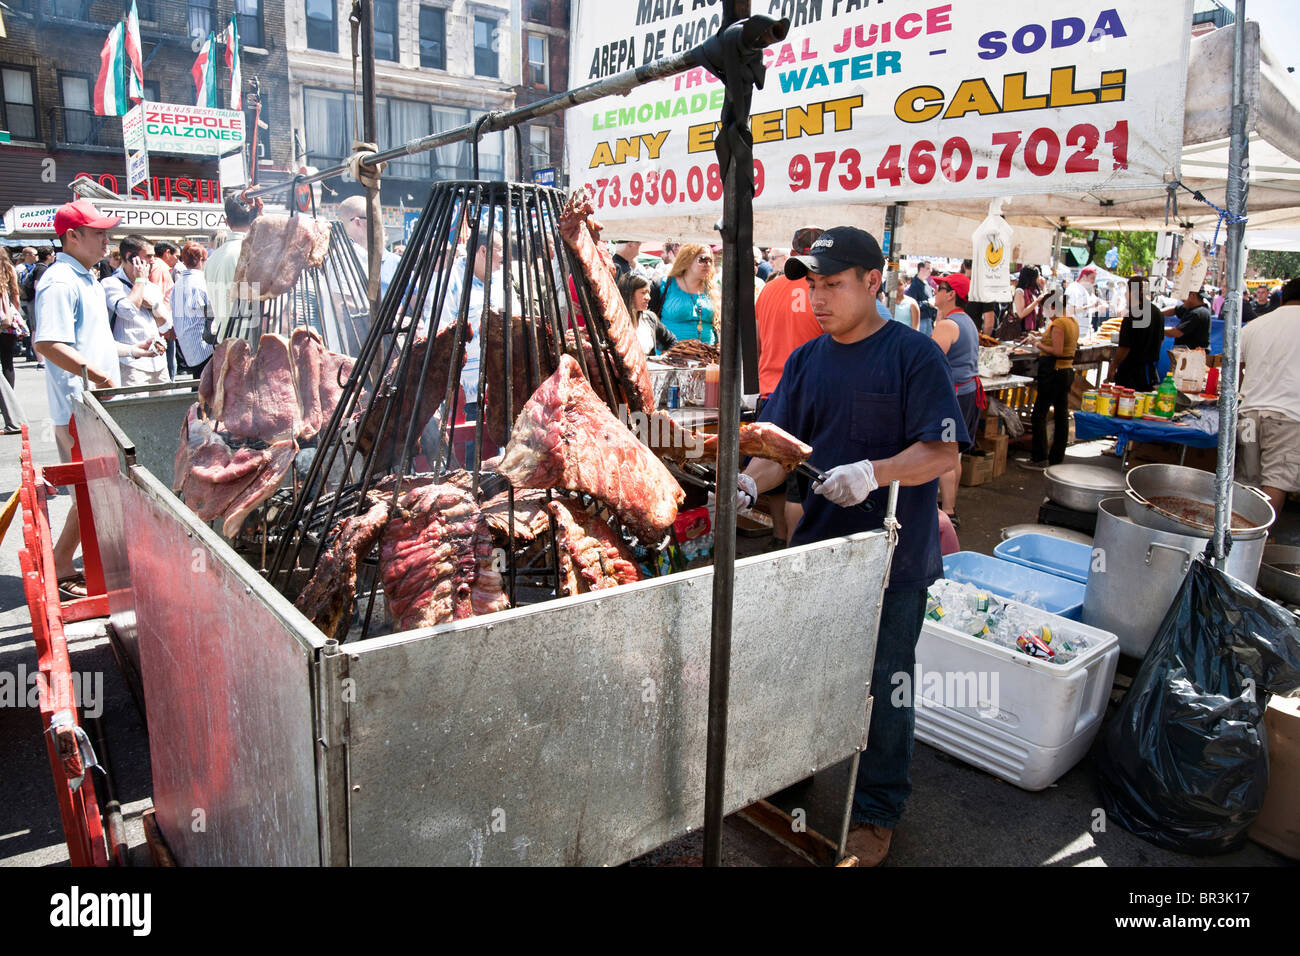 young Hispanic man tends rotating rack roasting meat as big crowd wanders 9th Avenue at annual International food festival Stock Photo